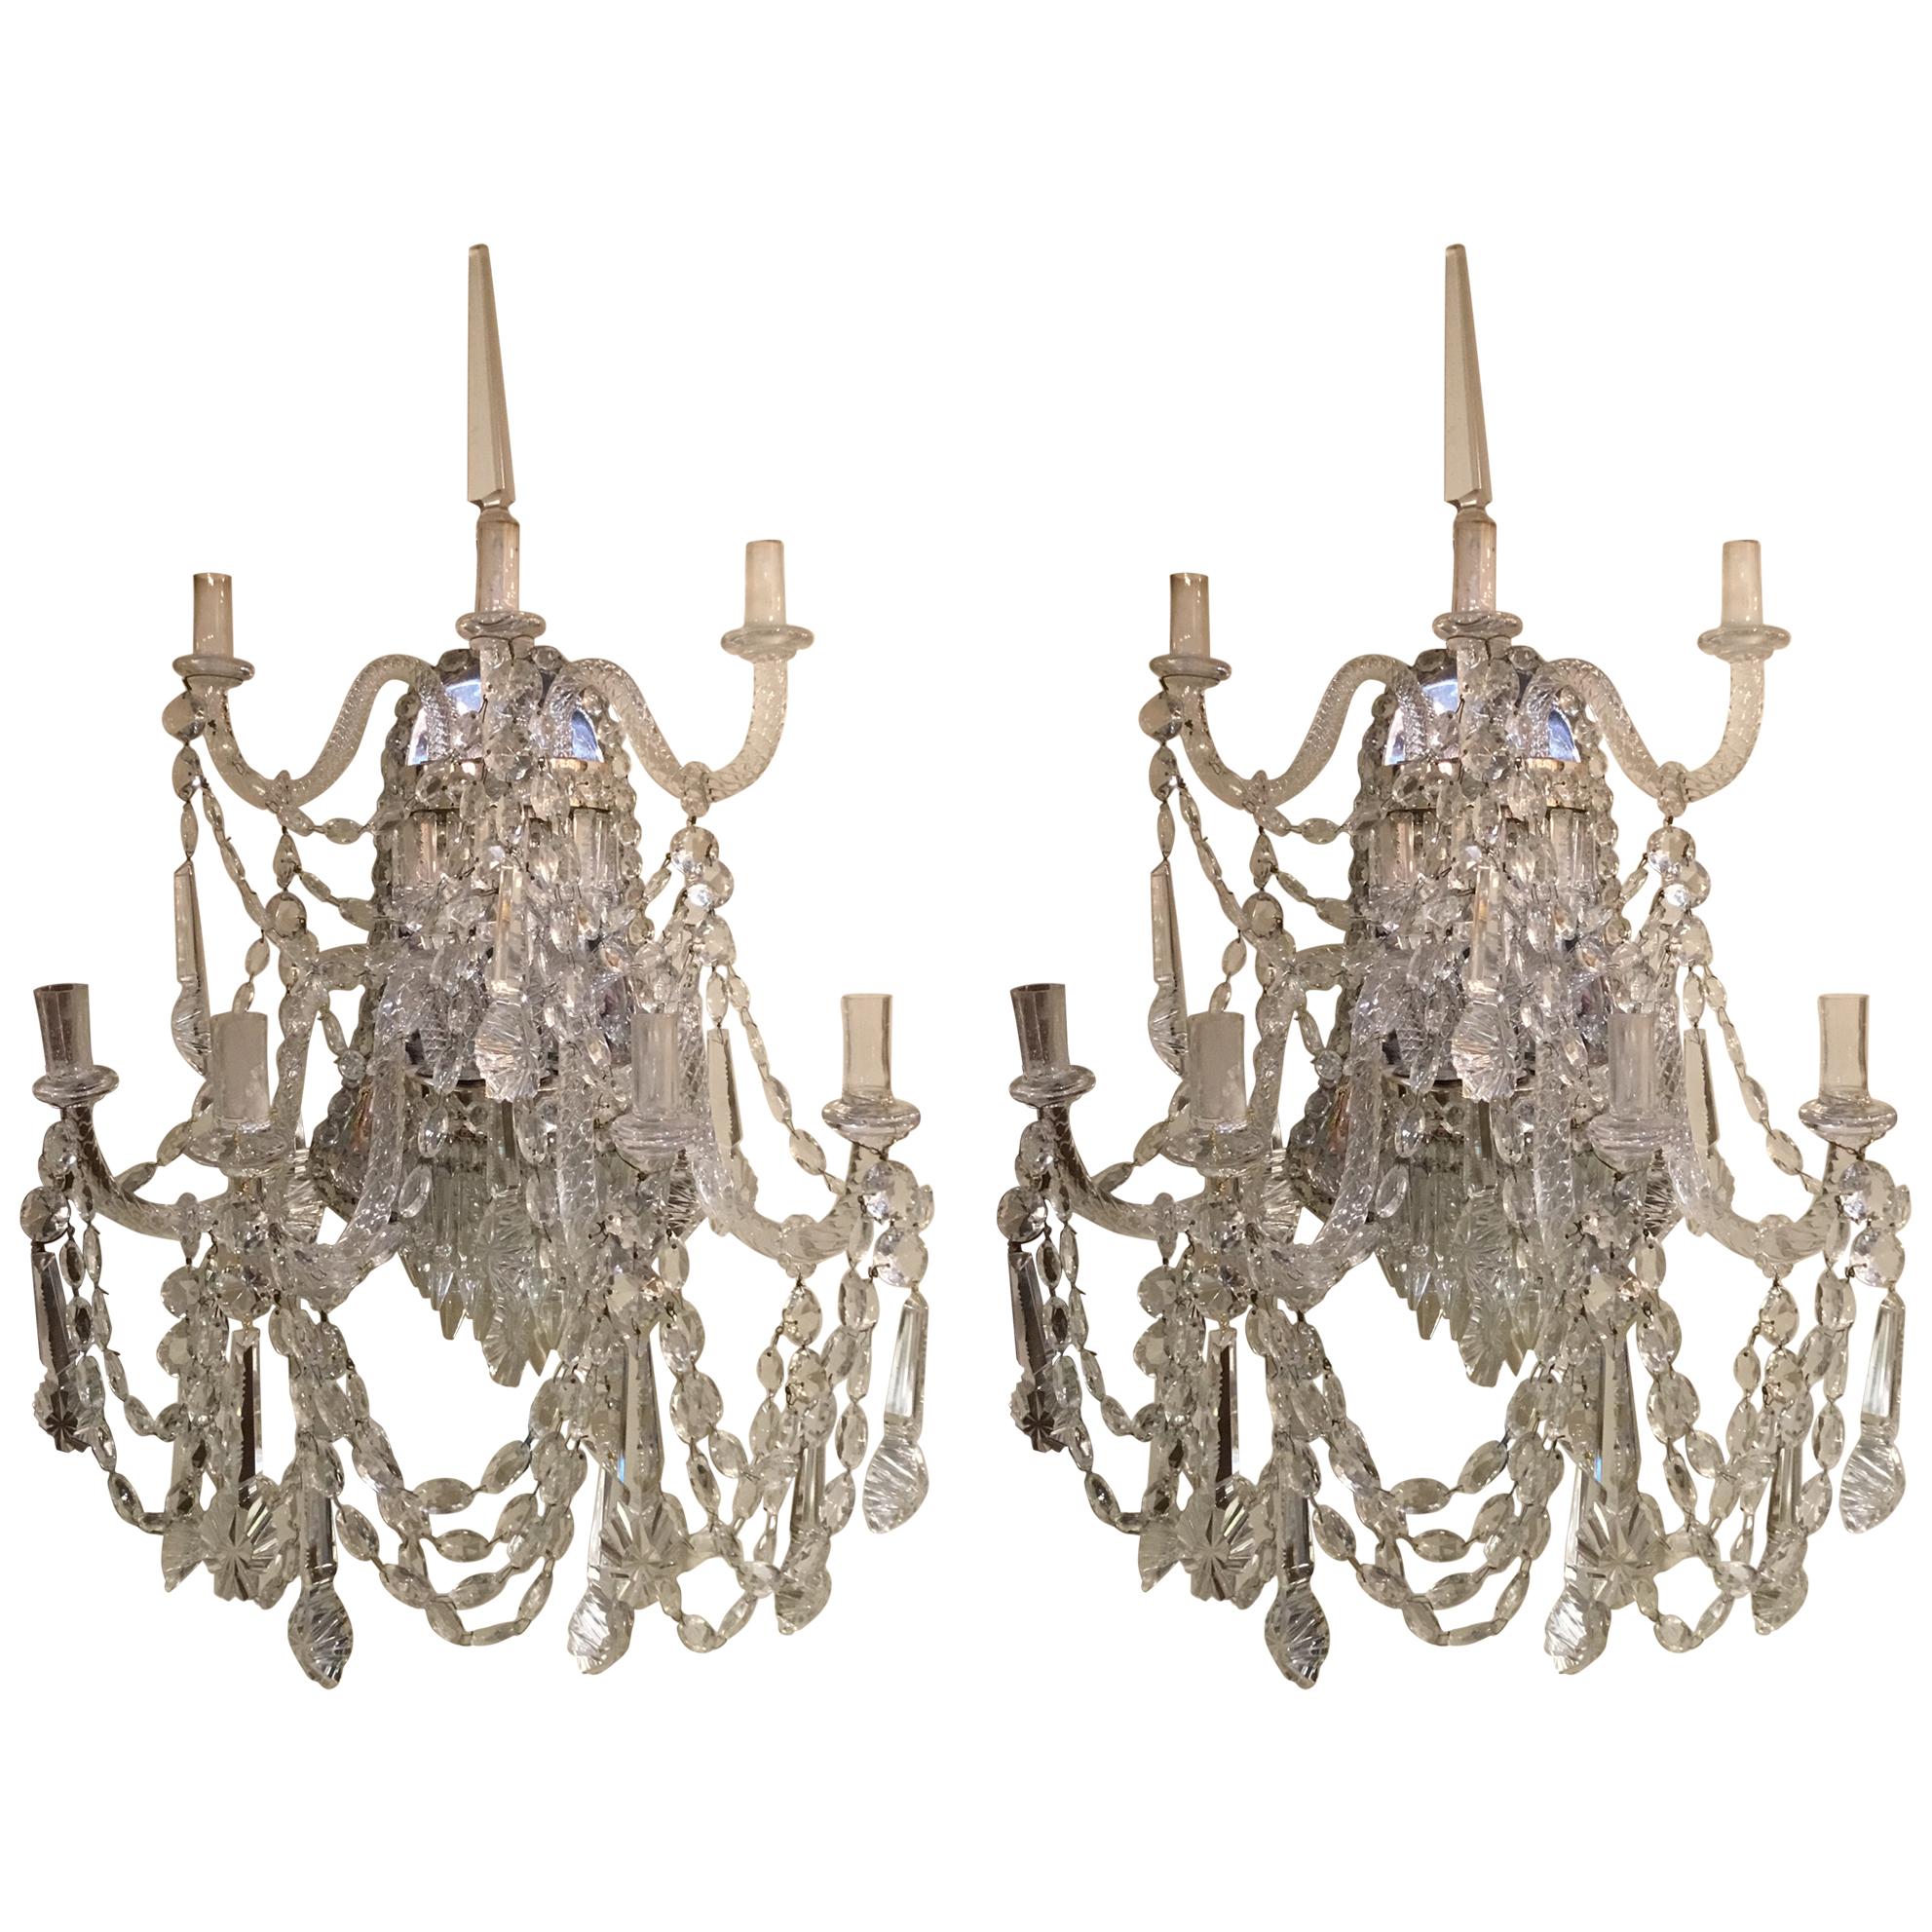 Large Pair of Venetian Crystal Sconces, Seven Candles, Silver Metal Backs